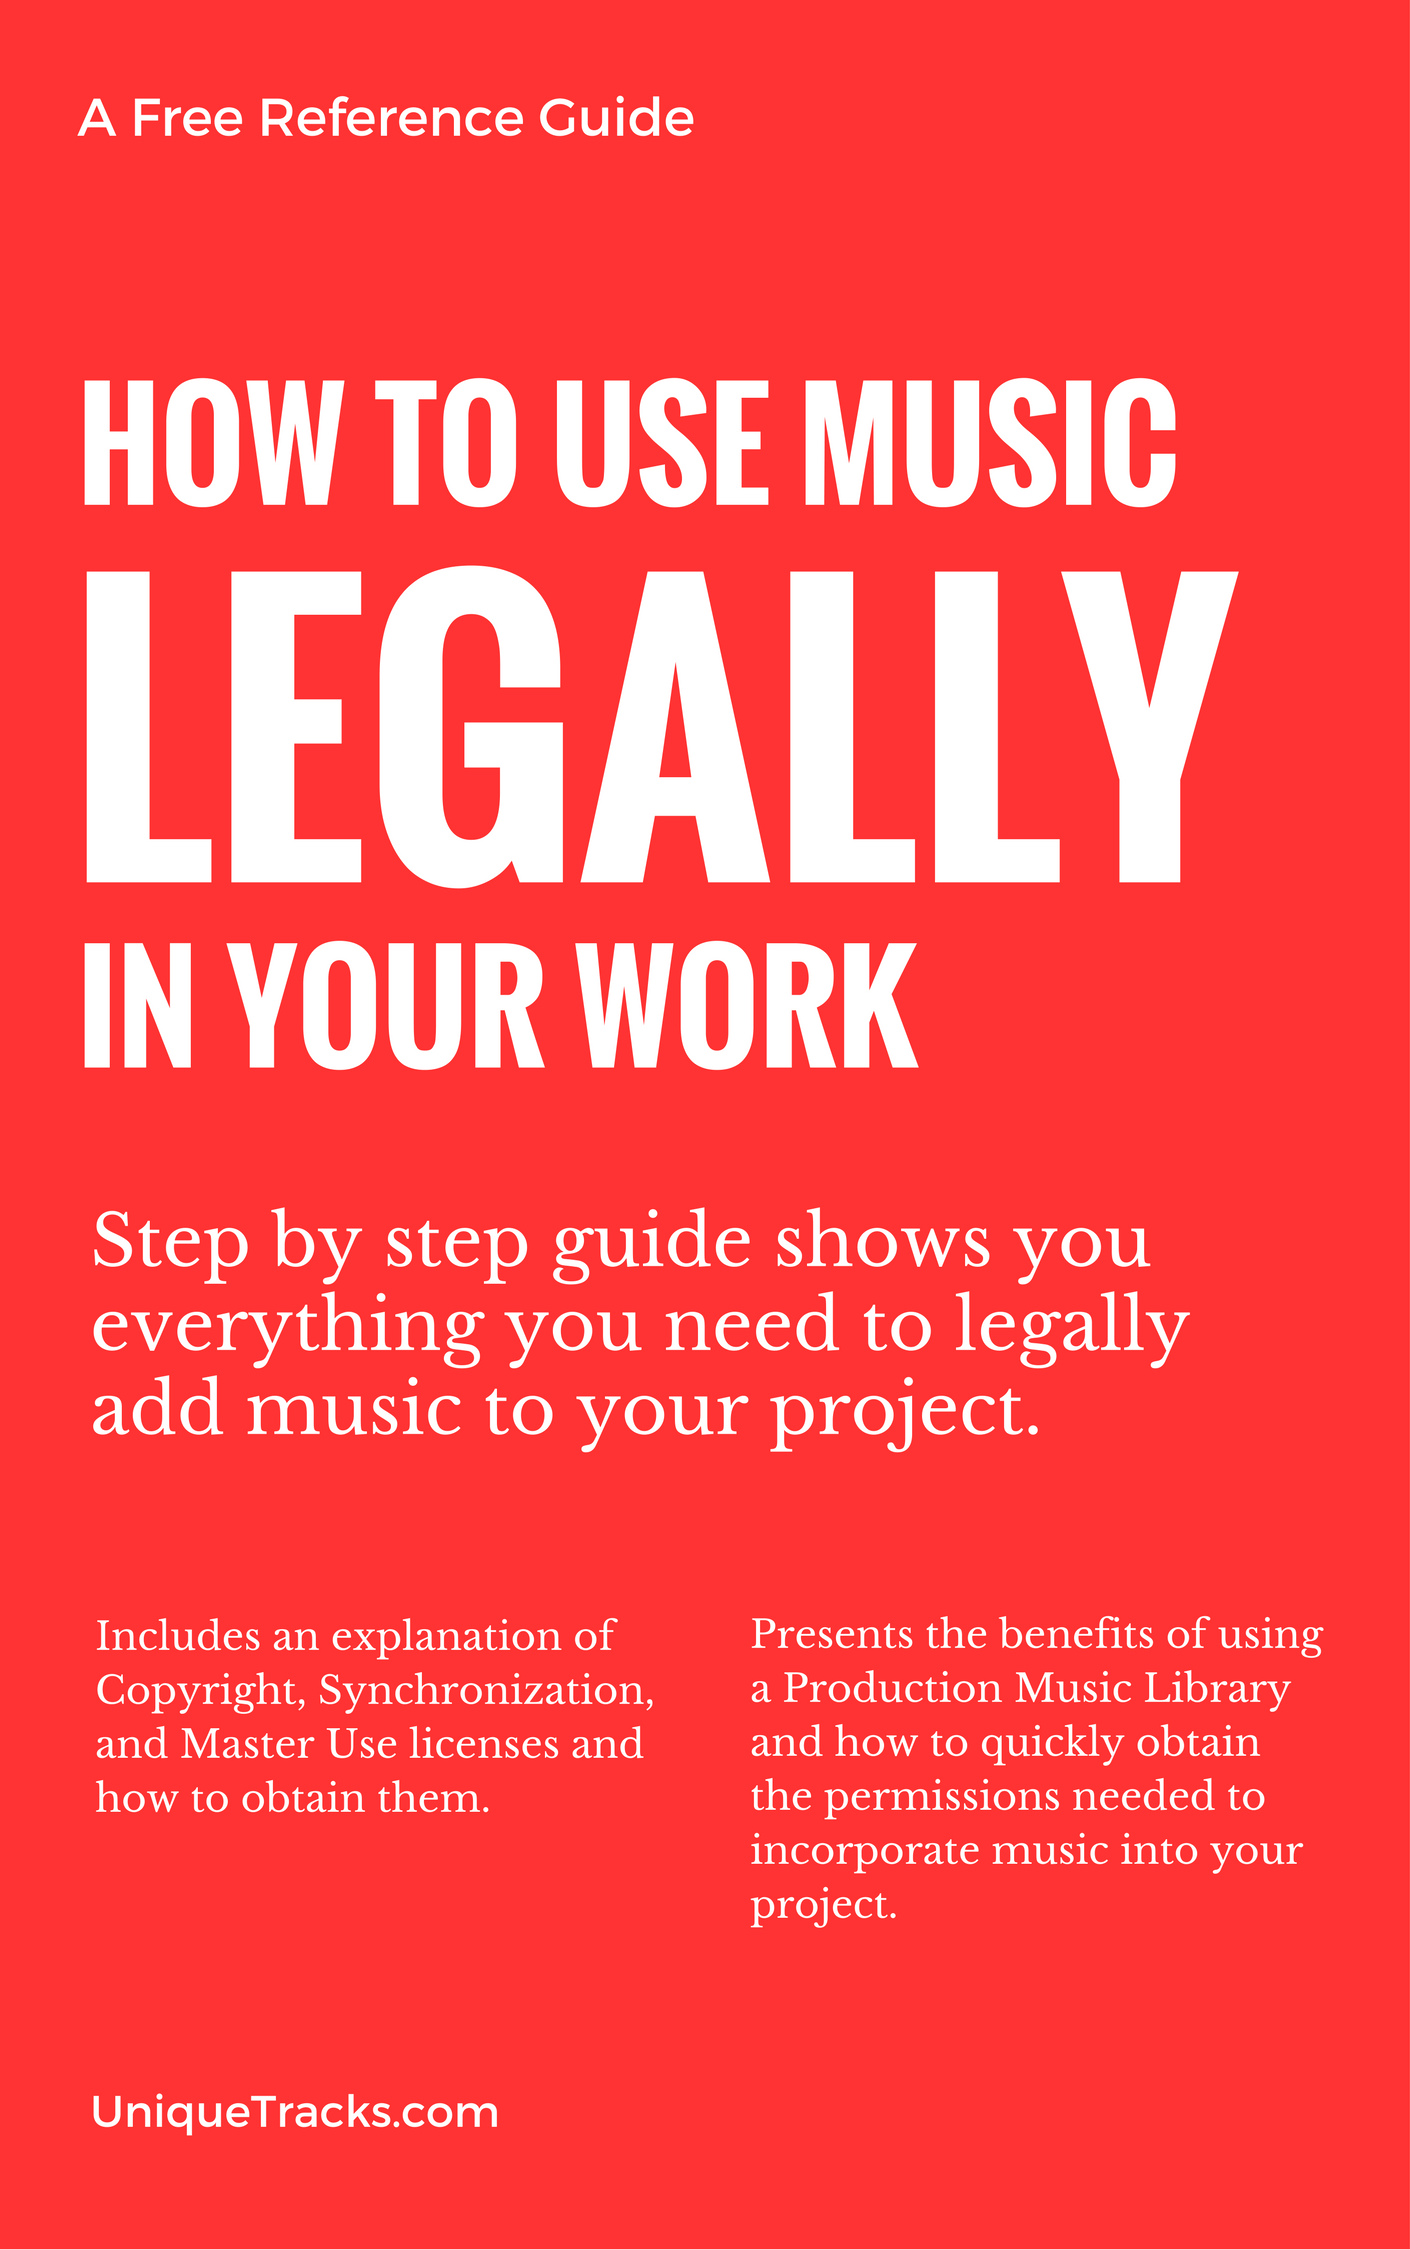 How To Use Music Legally In Your Work